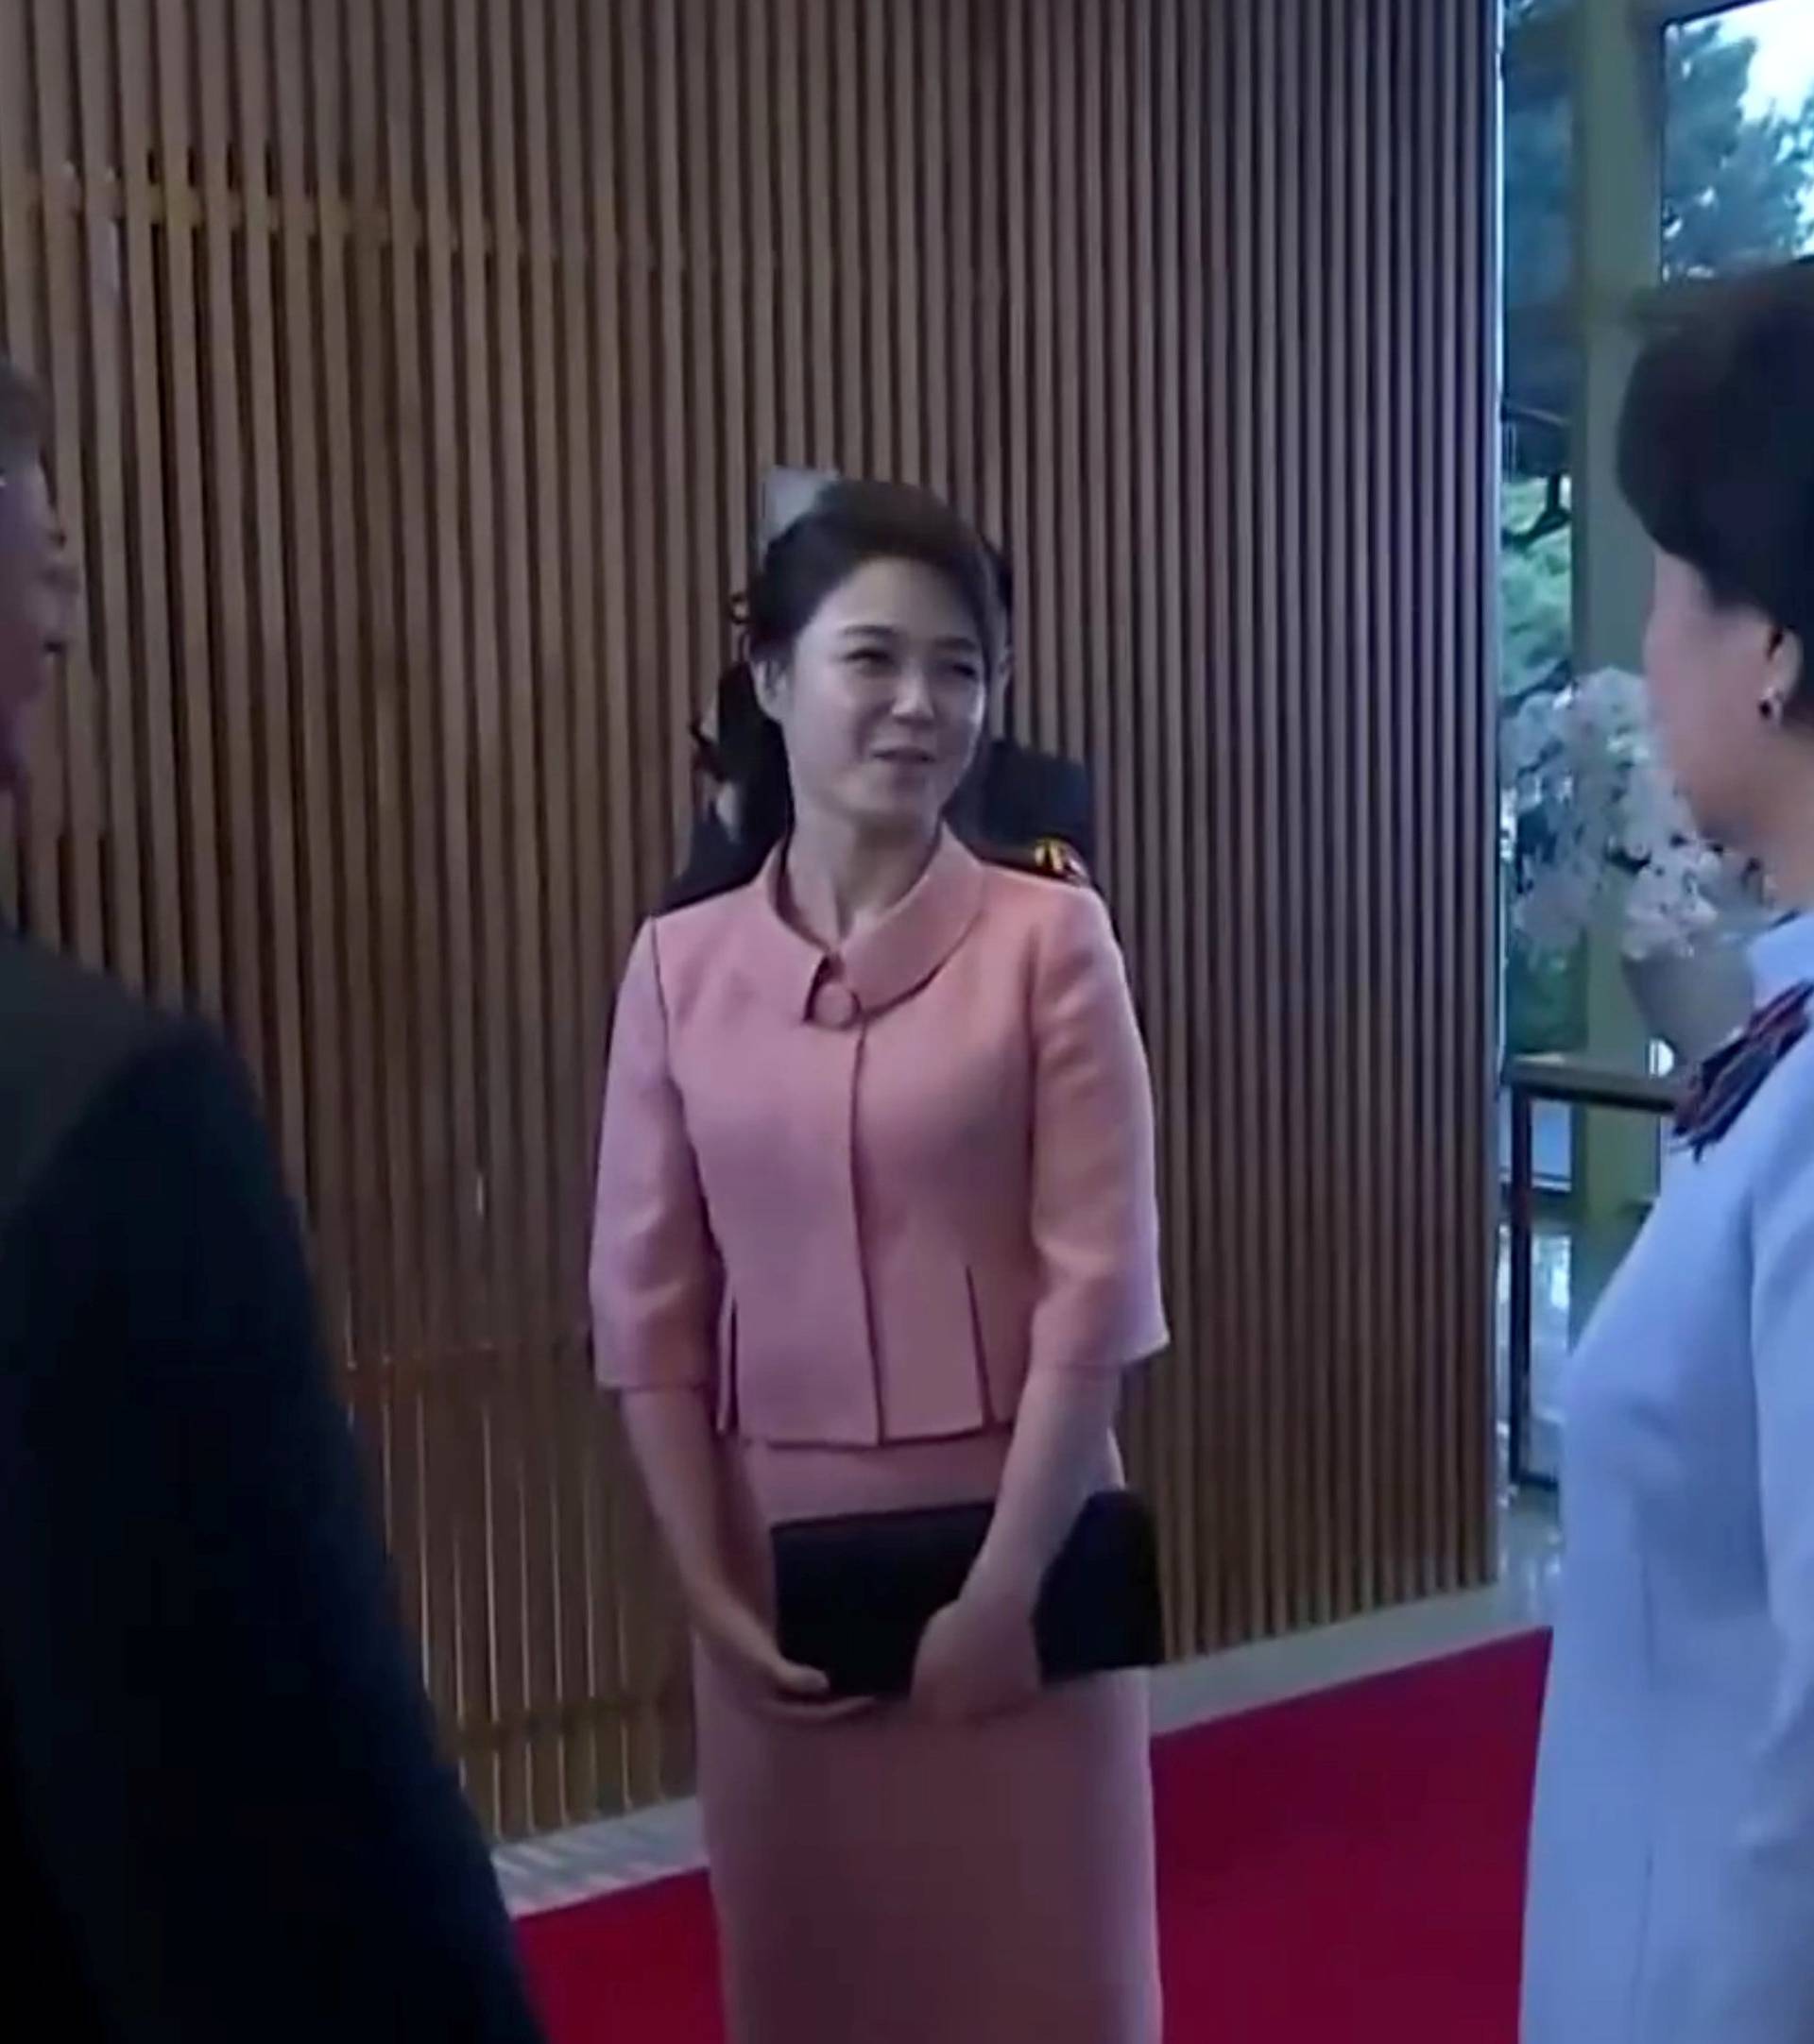 North Korean leader Kim Jong Un's wife Ri Sol Ju arrives to join the inter-Korea dinner at the truce village of Panmunjom